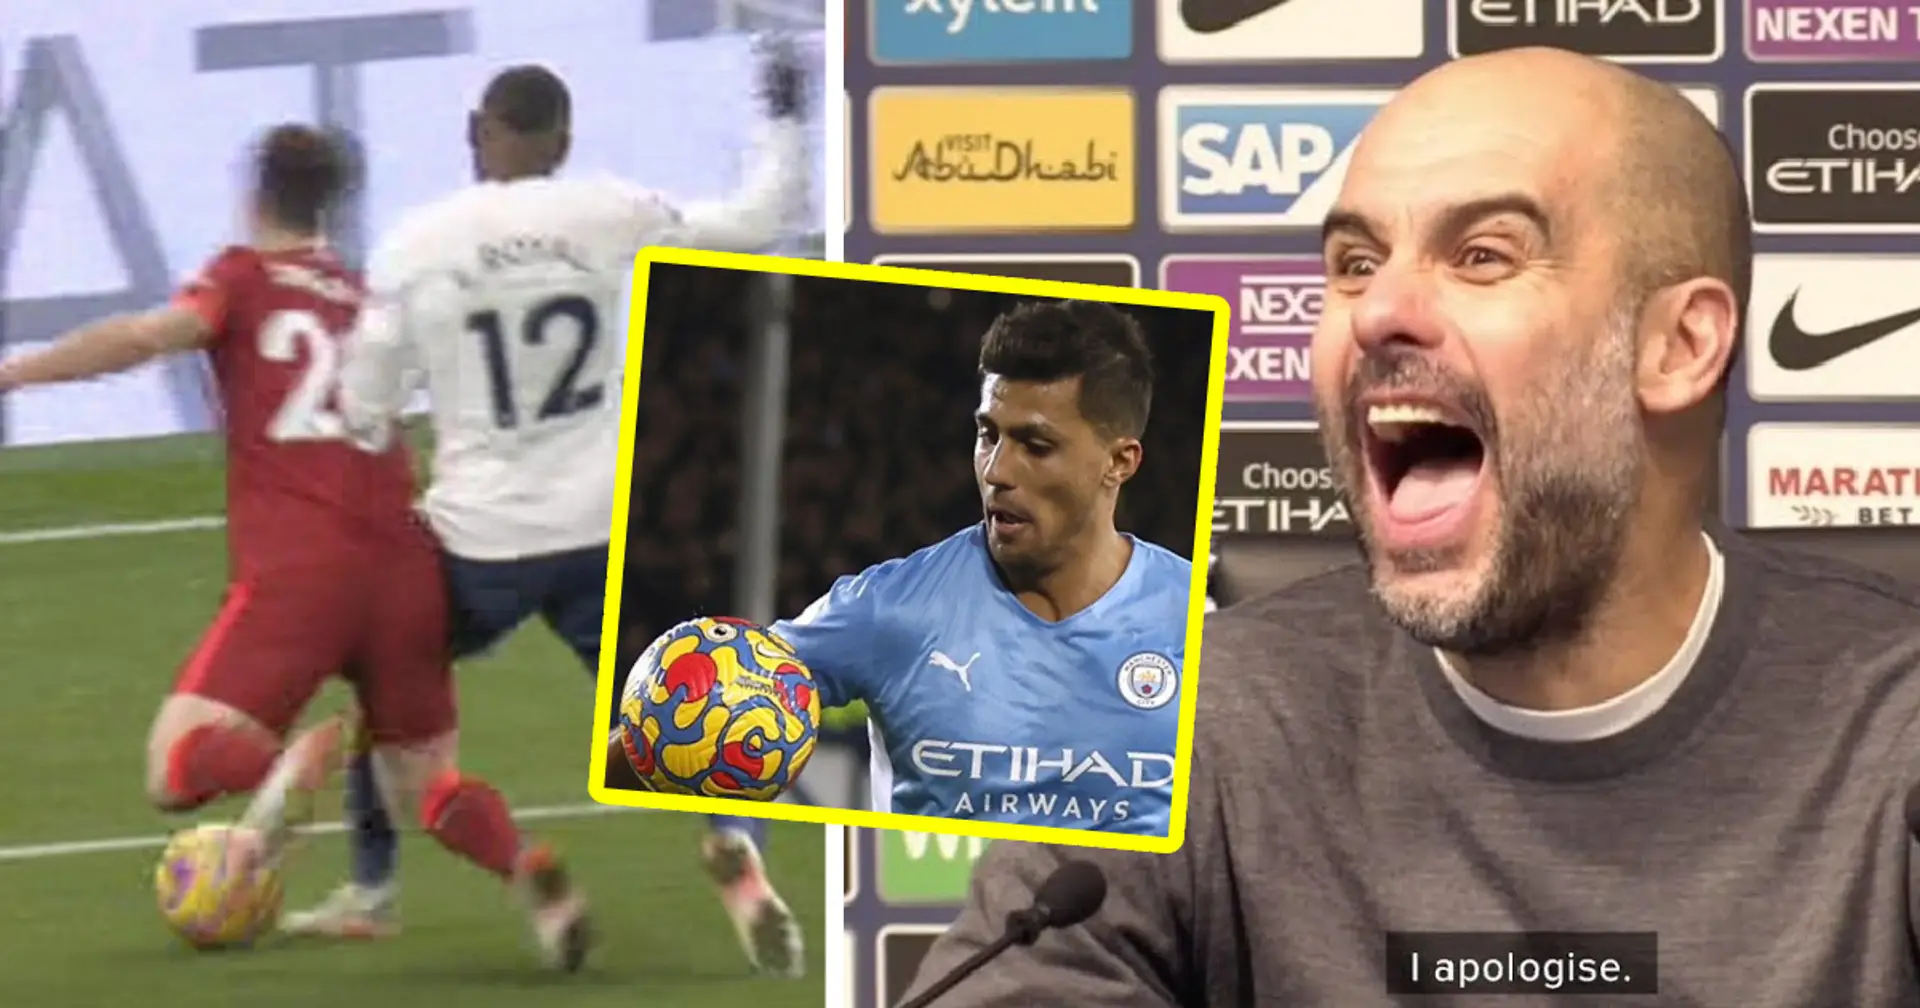 'We should be 10 points clear': LFC fan lists 4 referee mistakes that helped City to first place